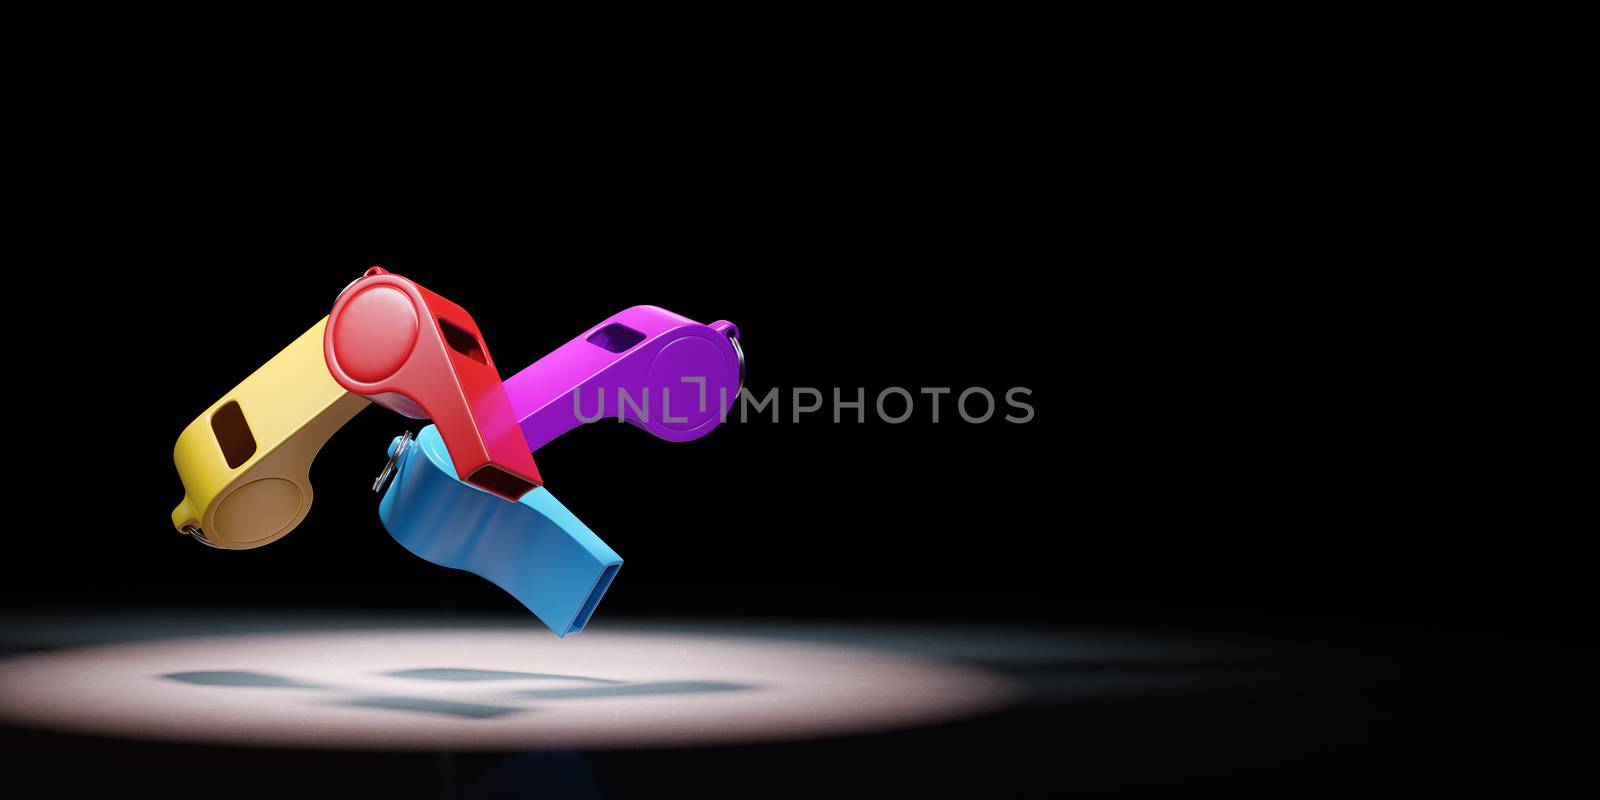 Colorful Whistles Spotlighted on Black Background by make